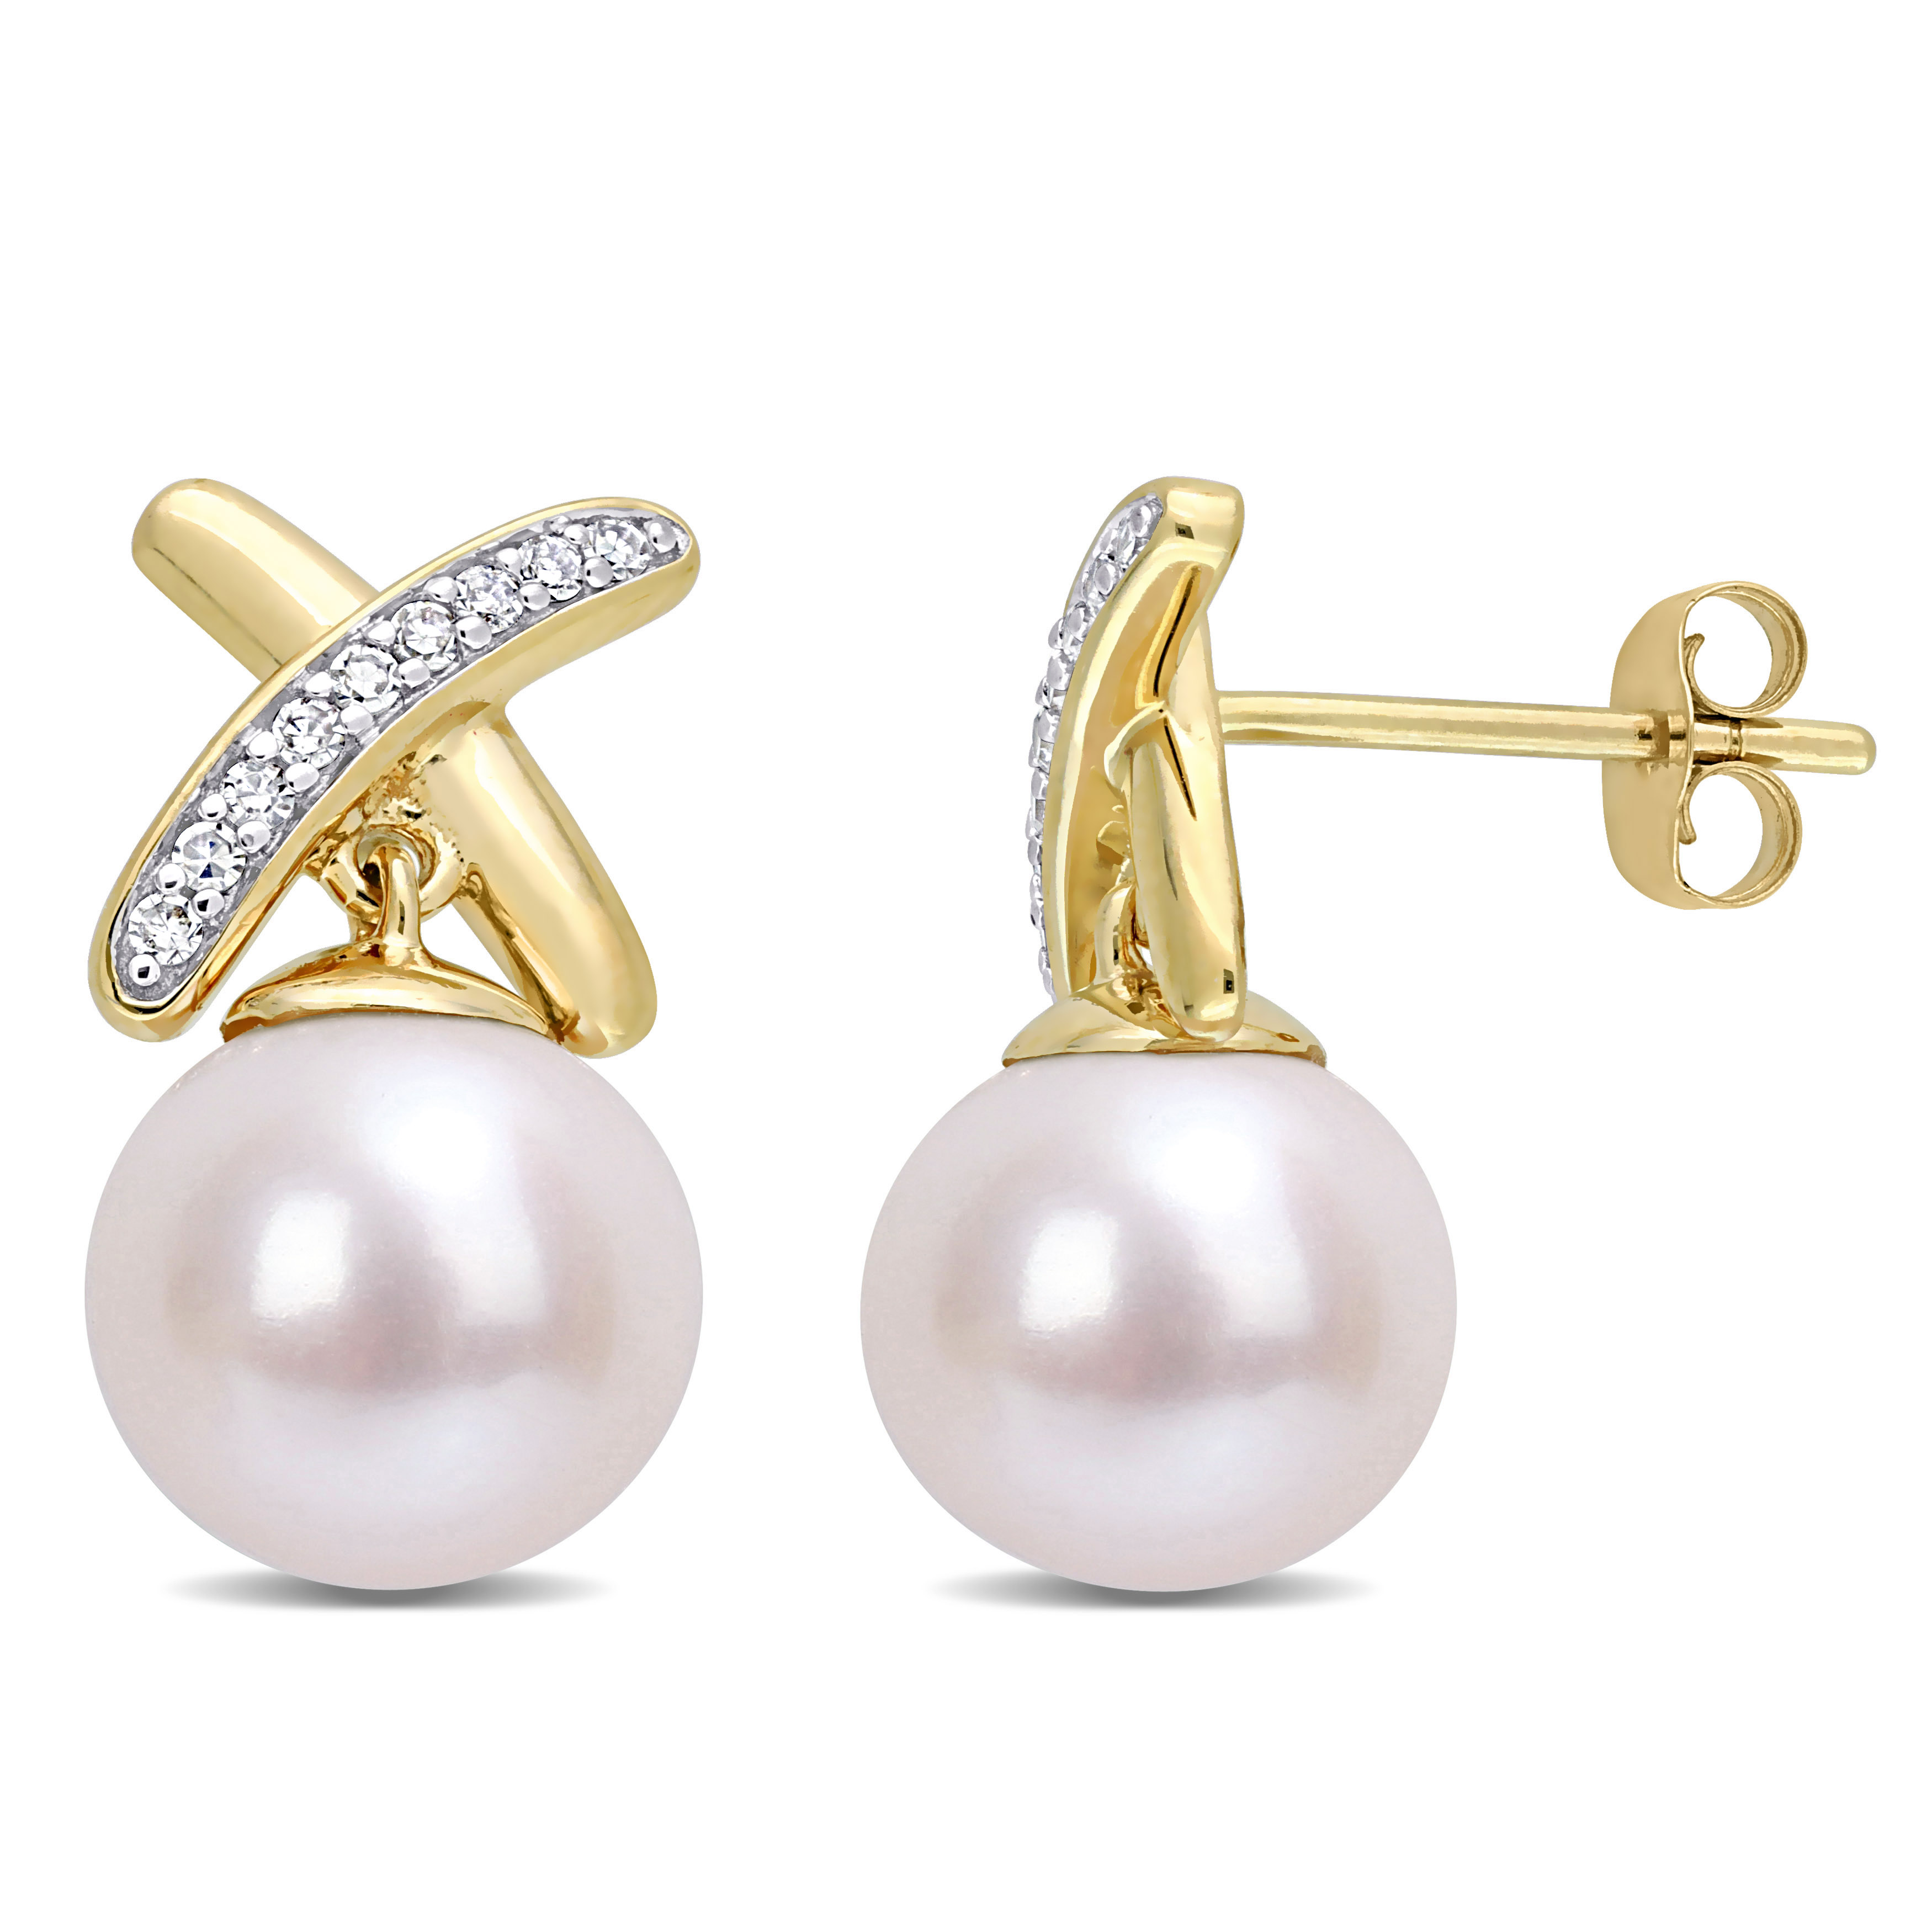 8.5-9 MM Cultured Freshwater Pearl and 1/6 CT TW Diamond 'X' Drop Earrings in 14k Yellow Gold